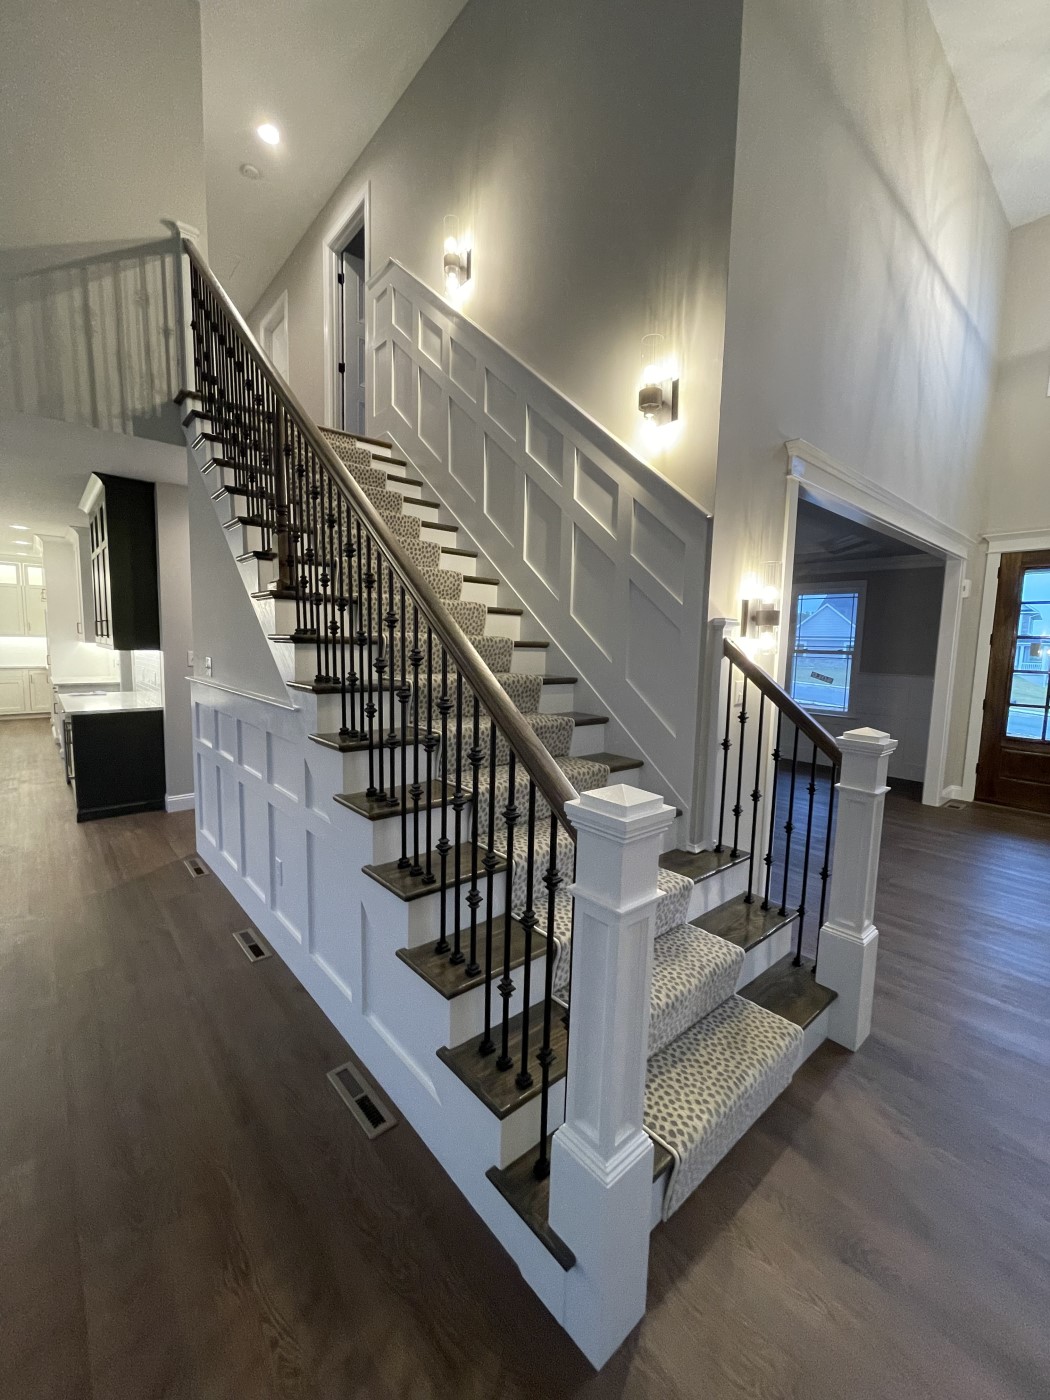 Foyer & Staircases - New Home Construction